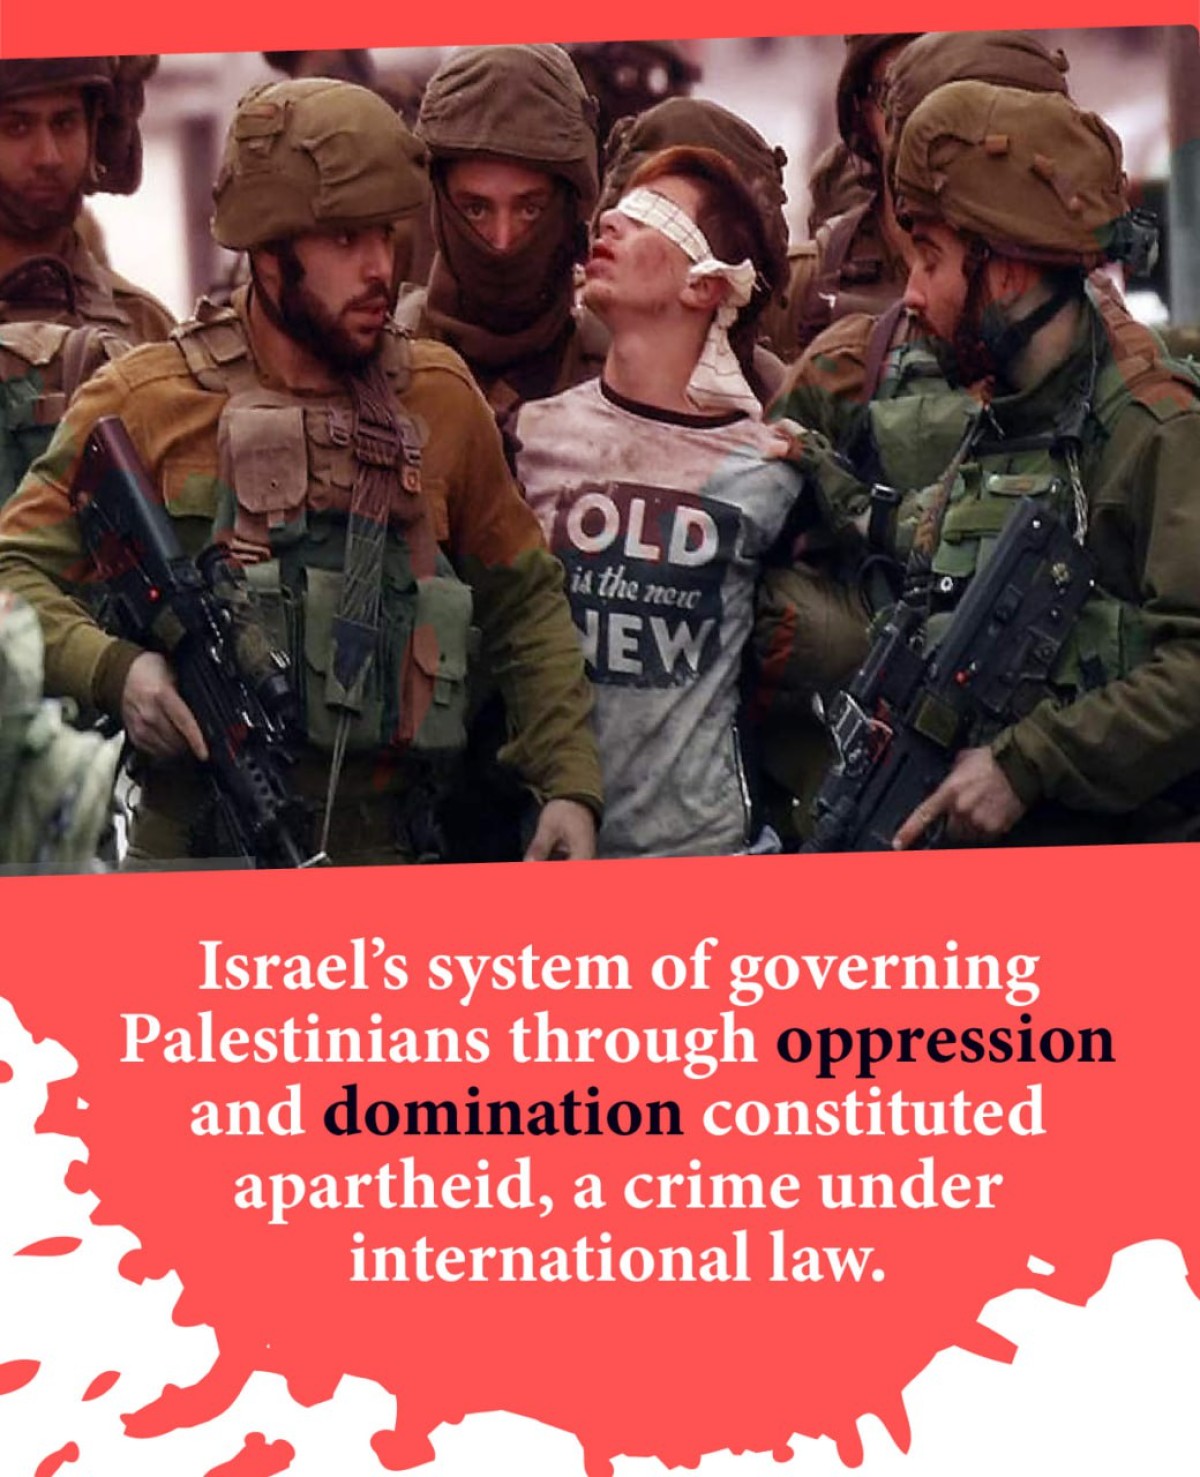 Israel's system of governing Palestinians through oppression and domination constituted apartheid